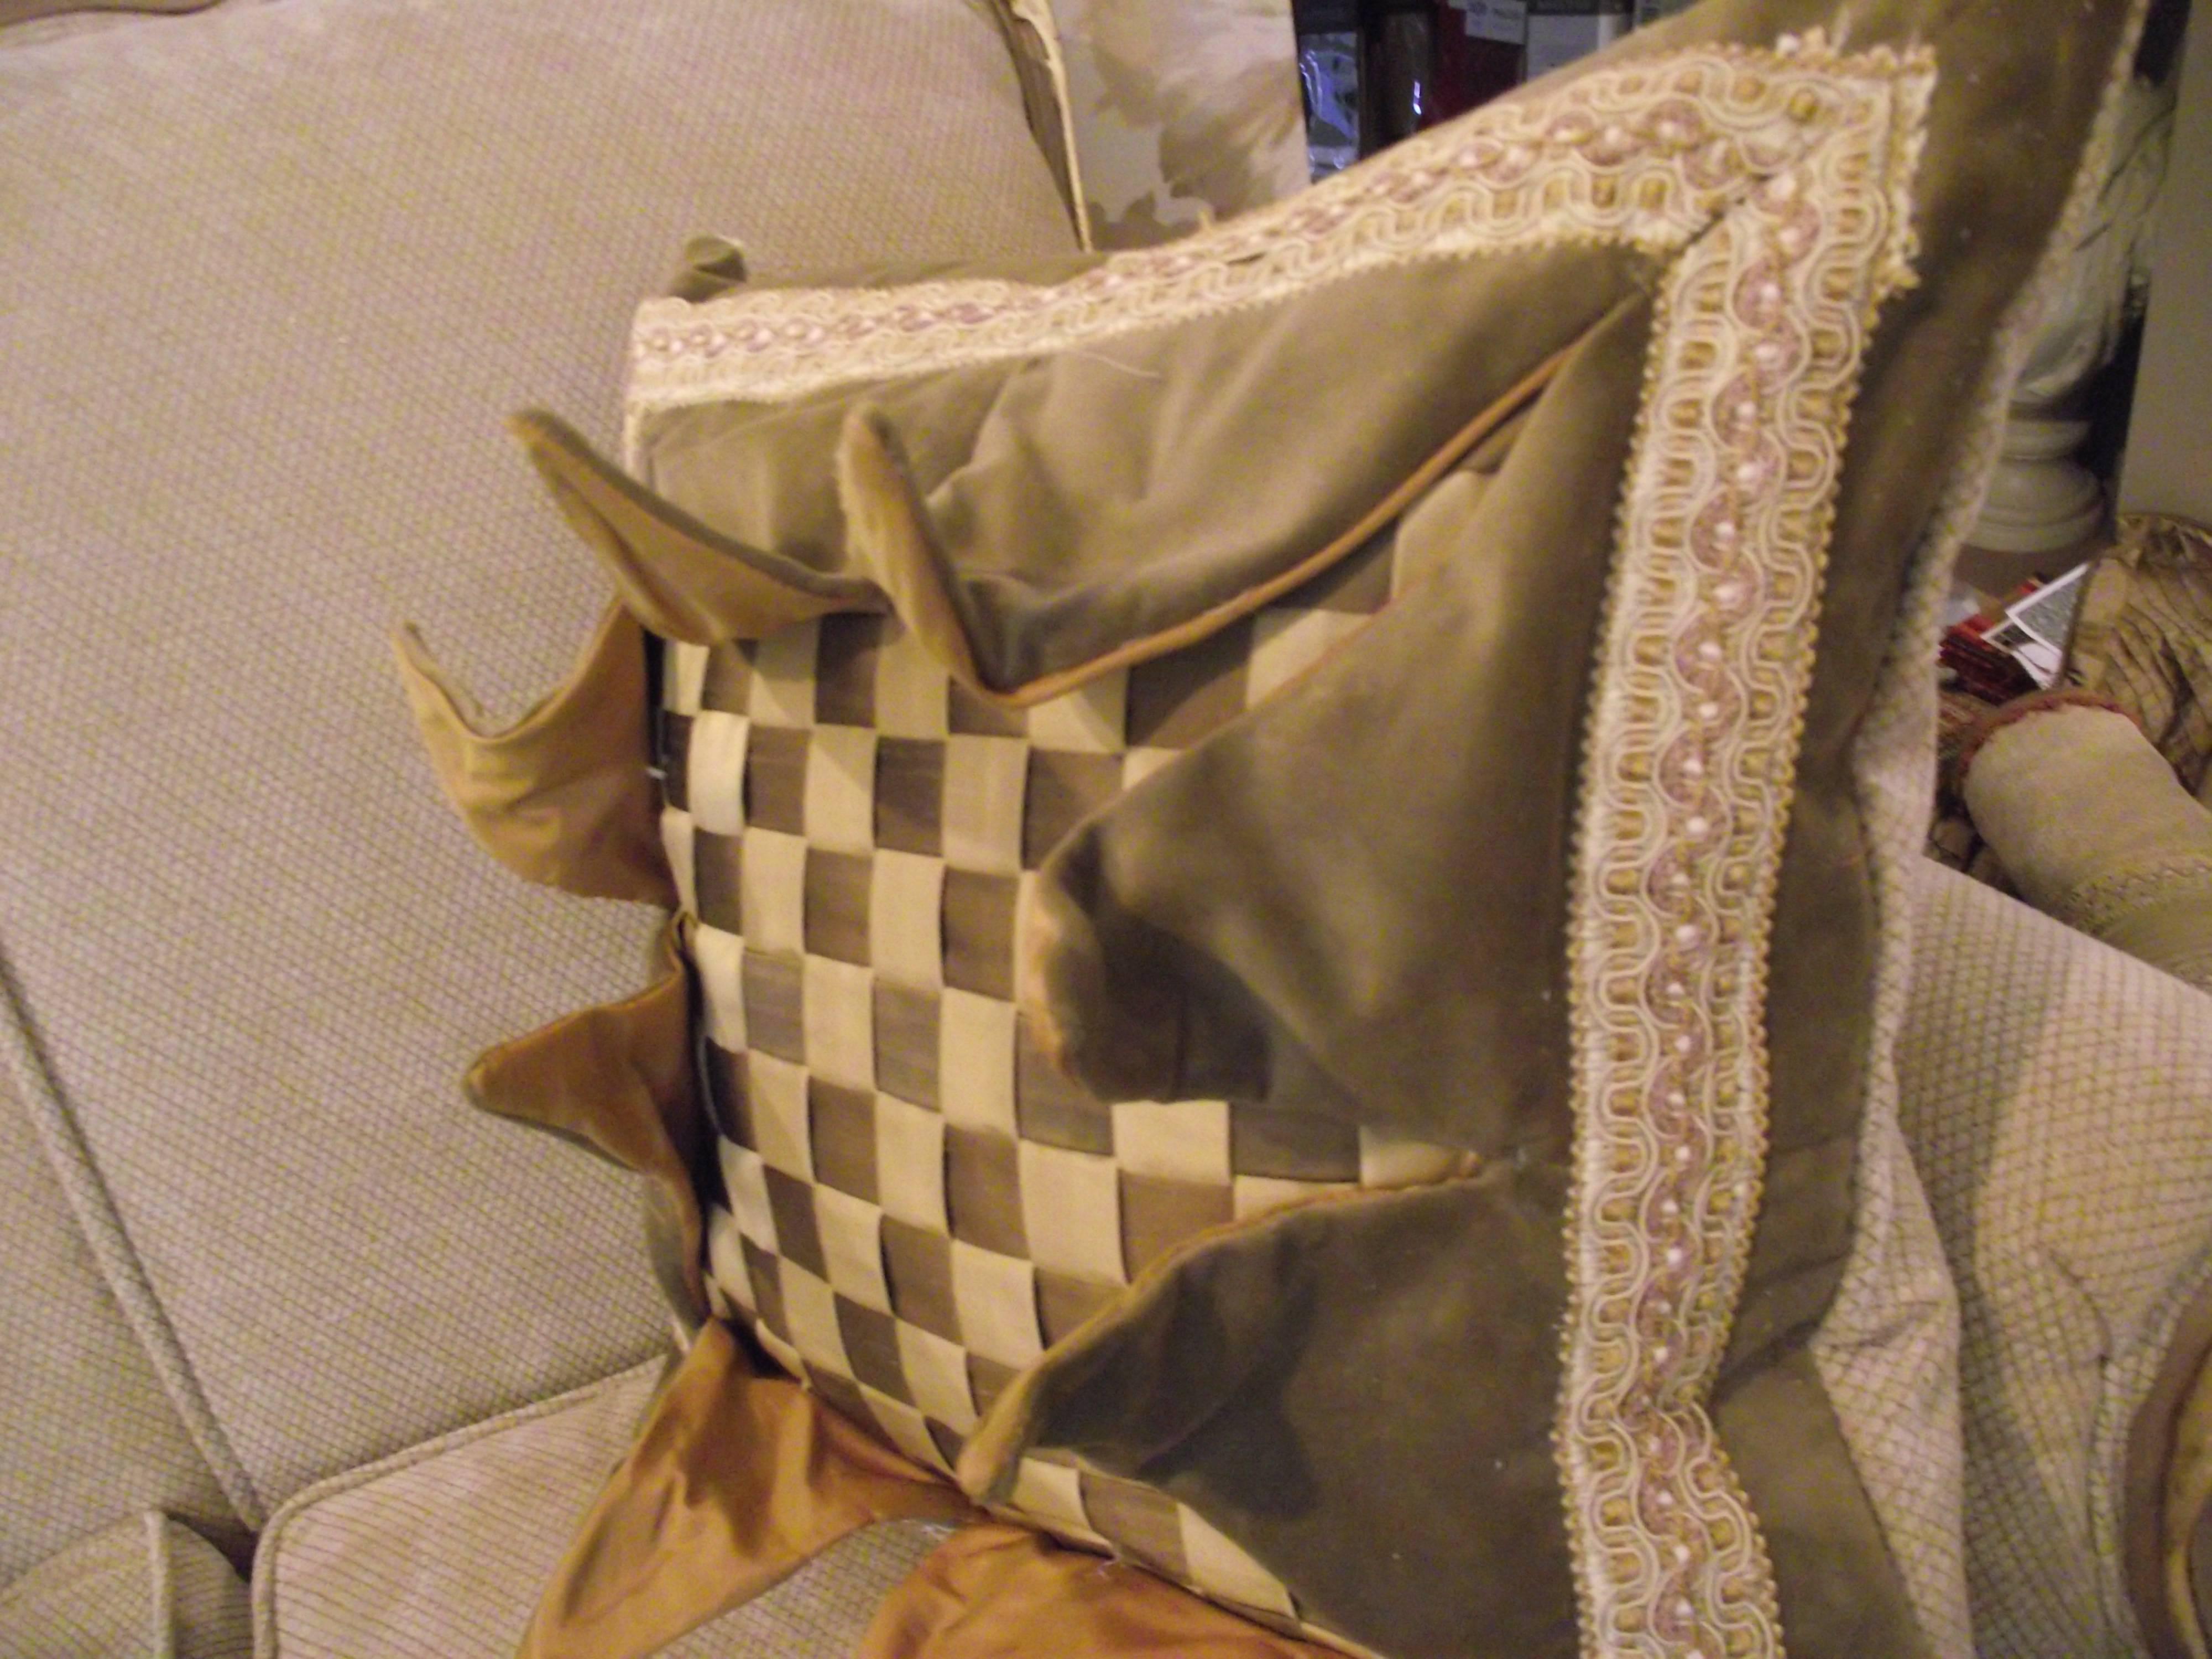 This is my first original design Explosion Pillow. It features silk strips woven into a checkerboard pattern. The front is made of light tan velvet lined in a coppery colored silk. The back is covered in light tan chenile.

Each explosion